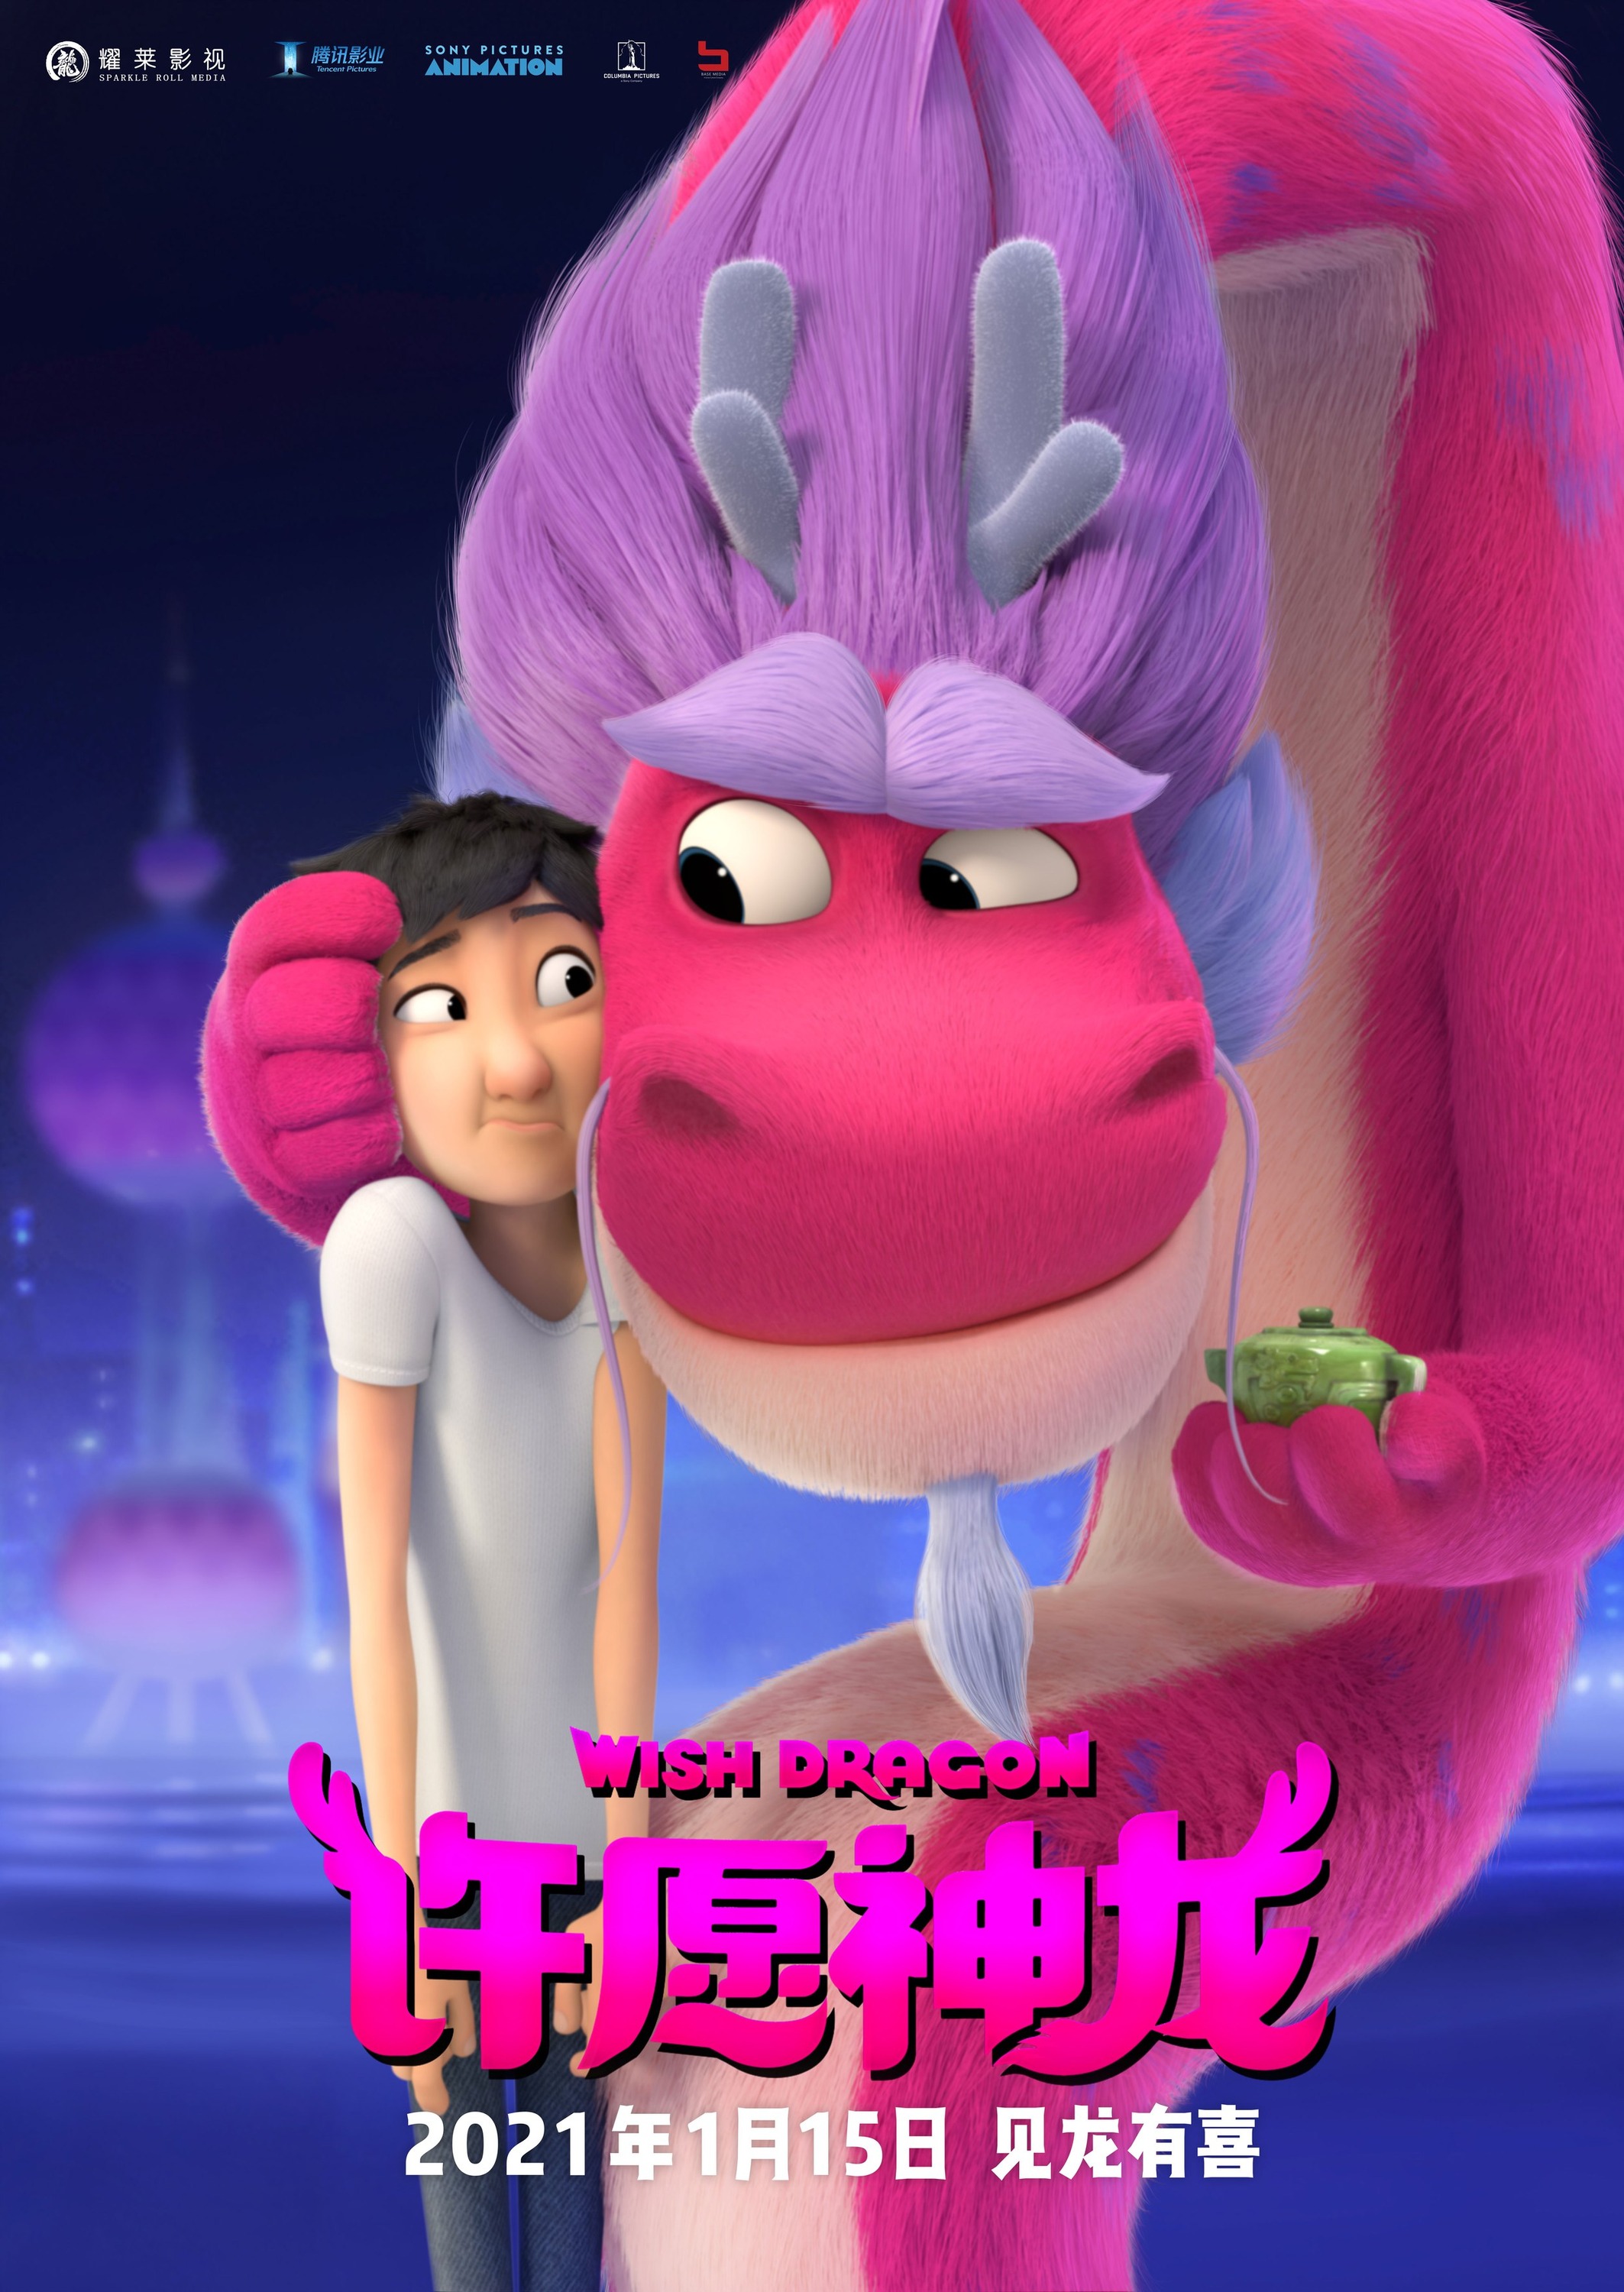 Mega Sized Movie Poster Image for Wish Dragon (#3 of 4)